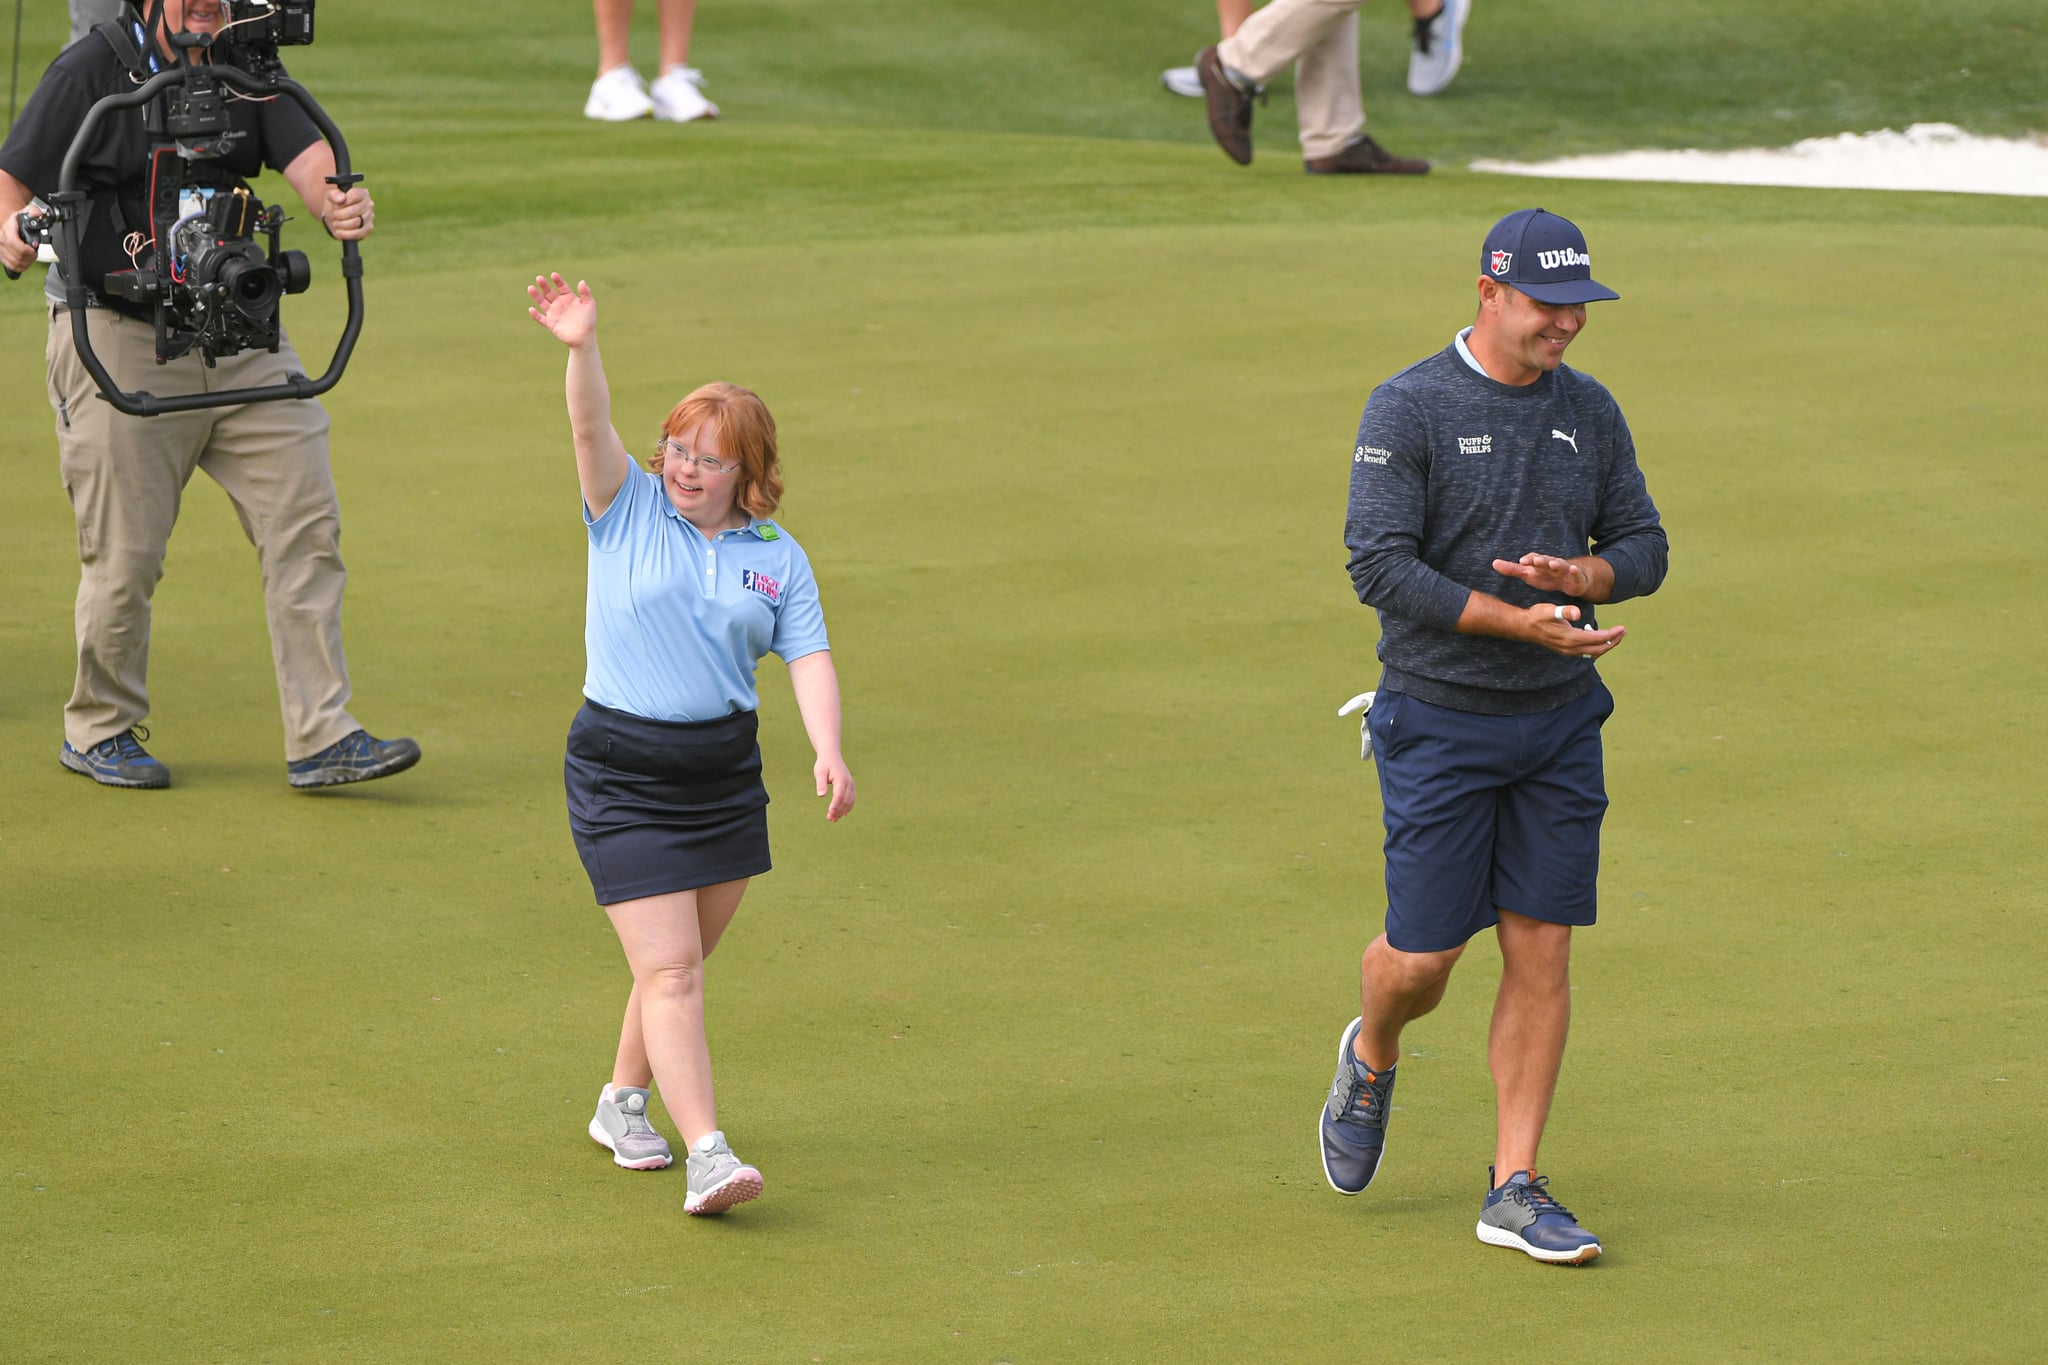 SCOTTSDALE, AZ - JANUARY 29: Amy Bockerstette waves while walking with Gary Woodland on the 16th green prior to the Waste Management Phoenix Open at TPC Scottsdale on January 29, 2020 in Scottsdale, Arizona. (Photo by Ben Jared/PGA TOUR via Getty Images)